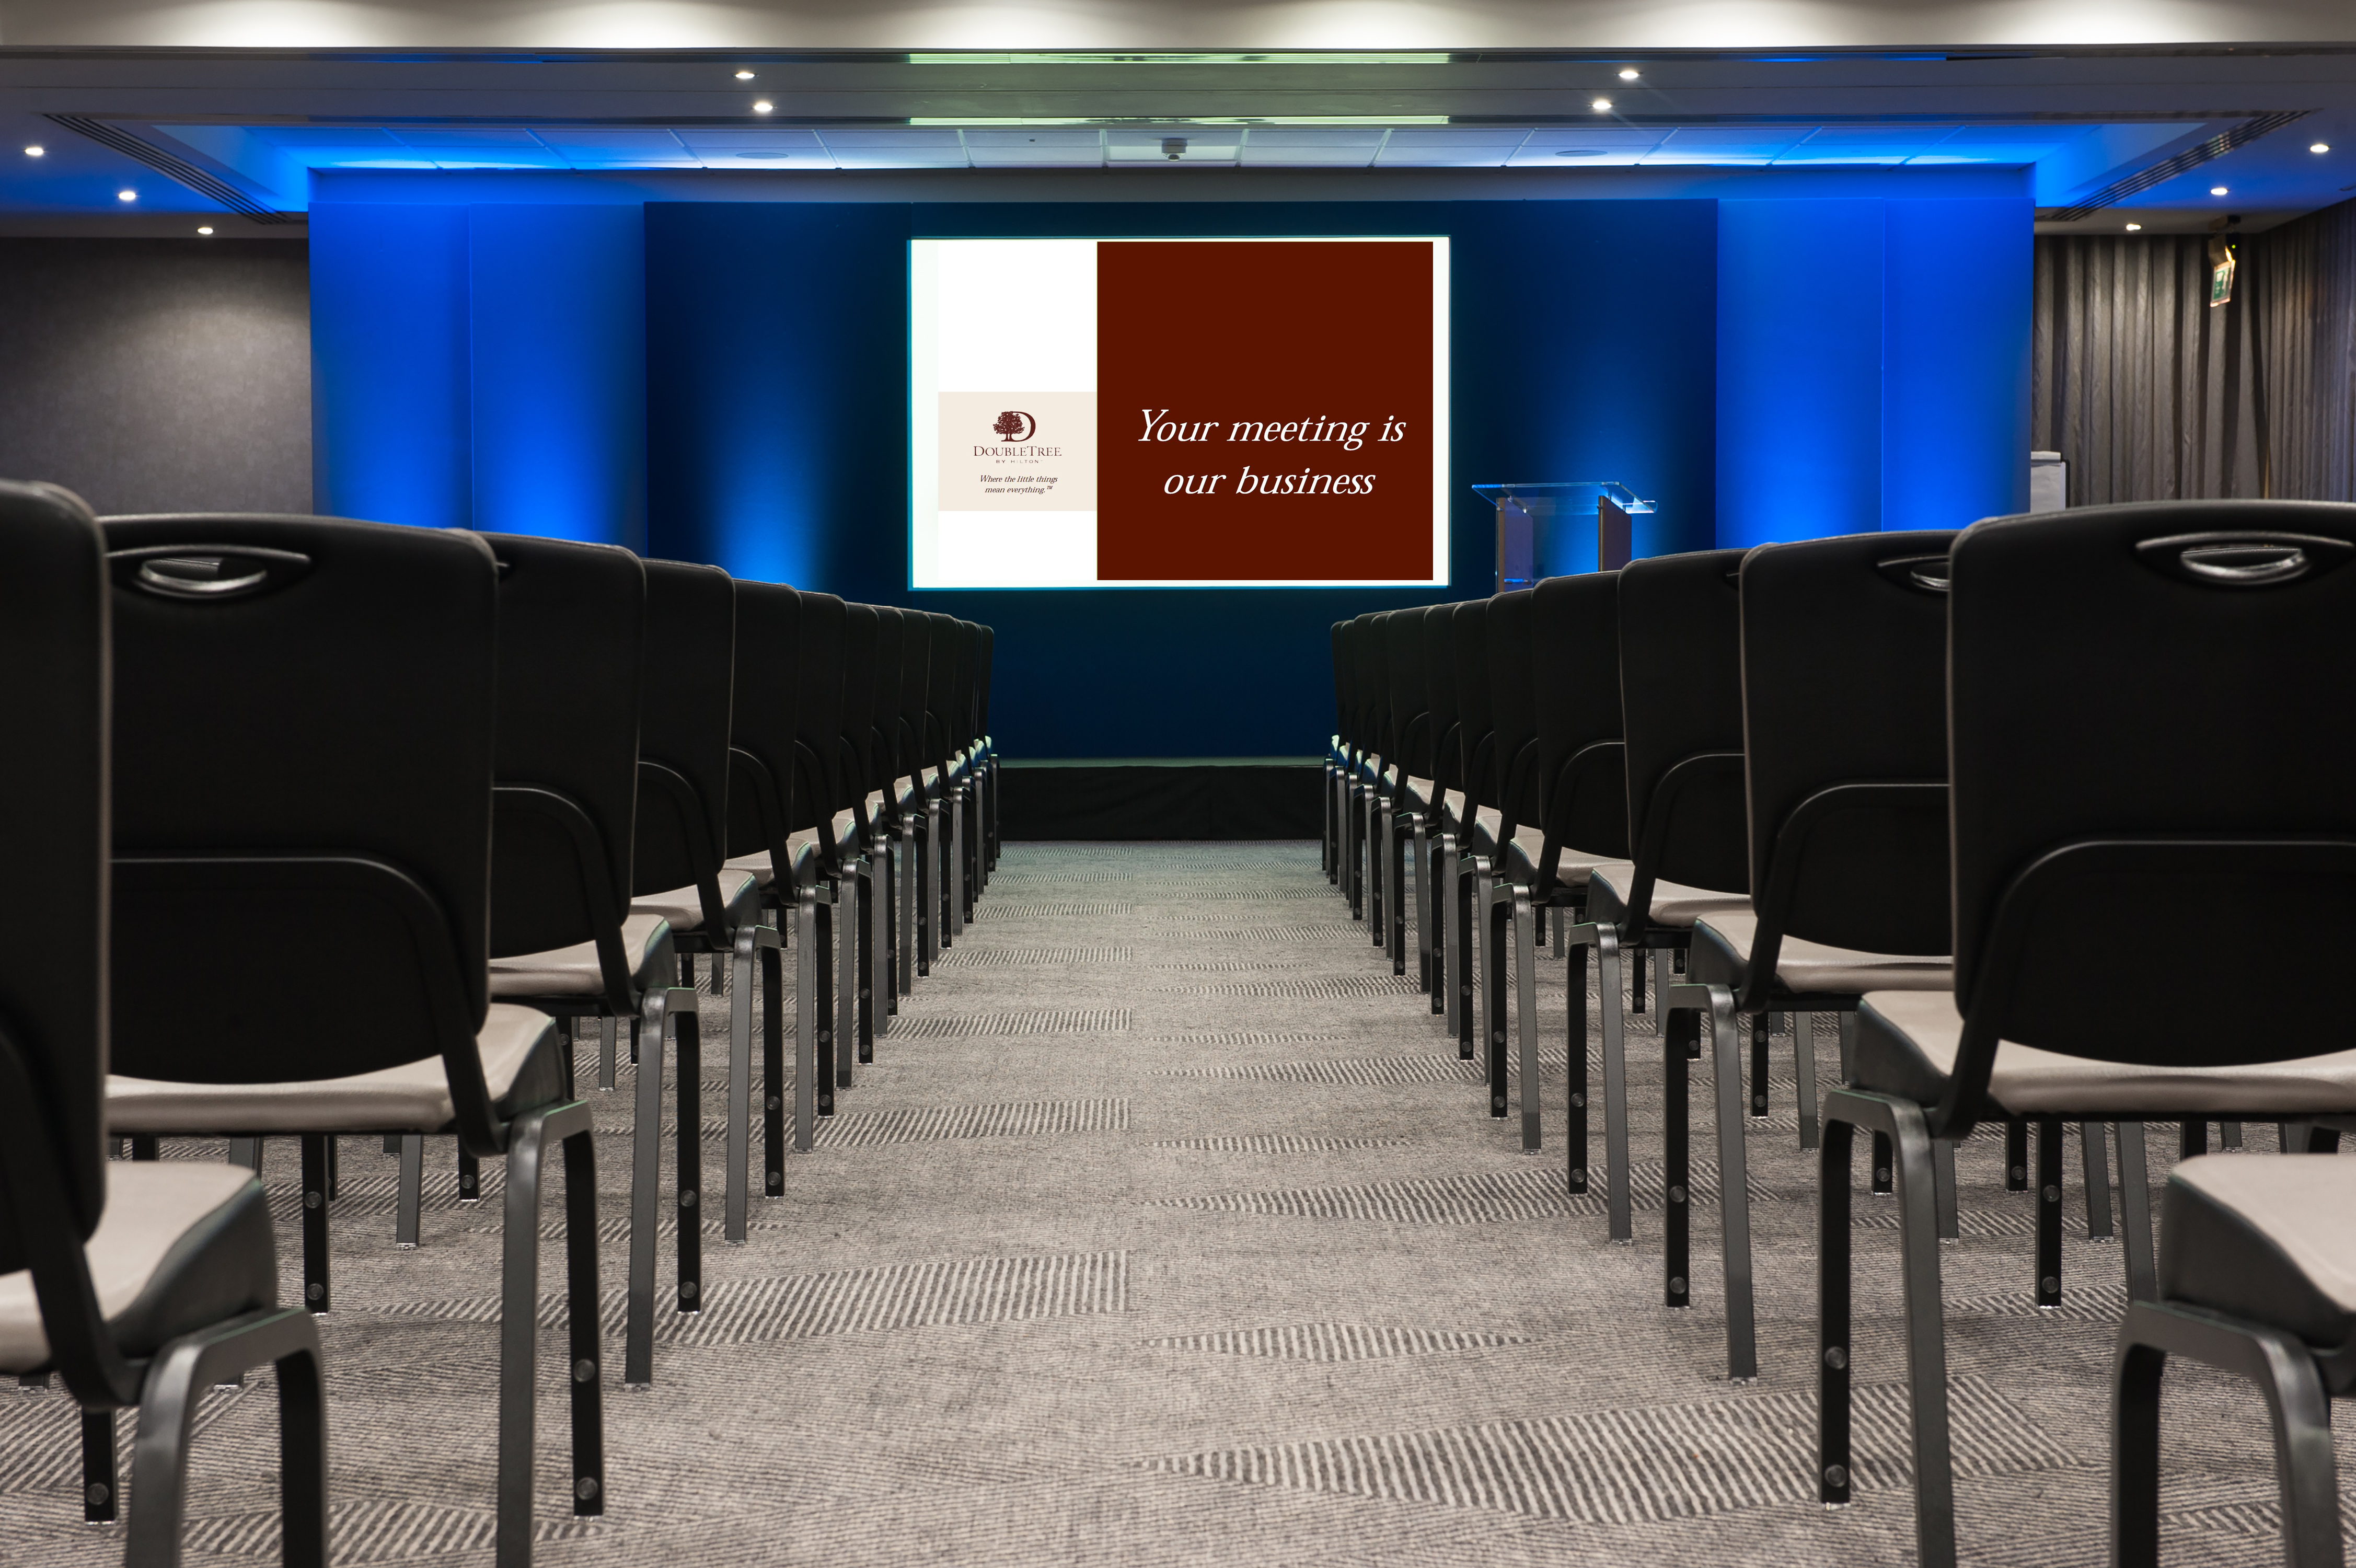 Meeting Room Arranged Theater Style With Rows of Black Chairs Facing Projector Screen and Podium